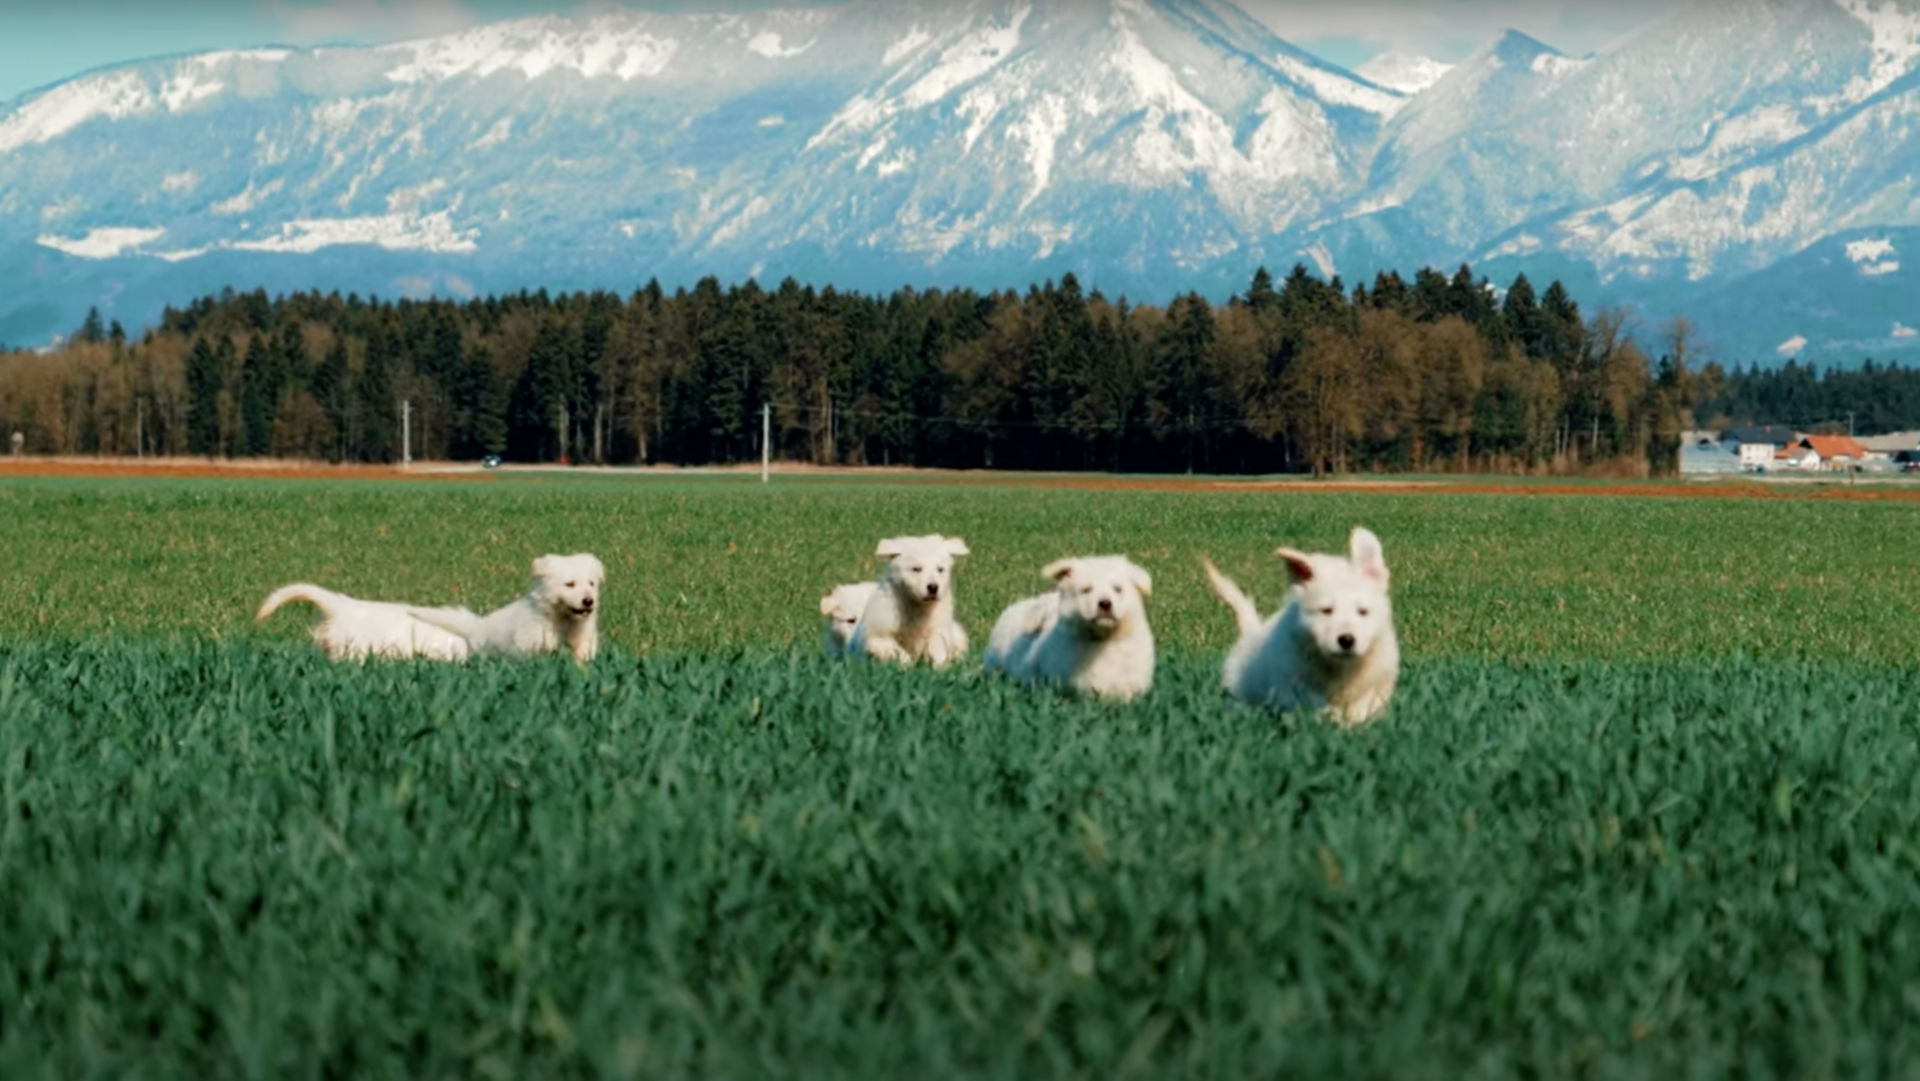 A bunch of white puppies running through a grassy filed